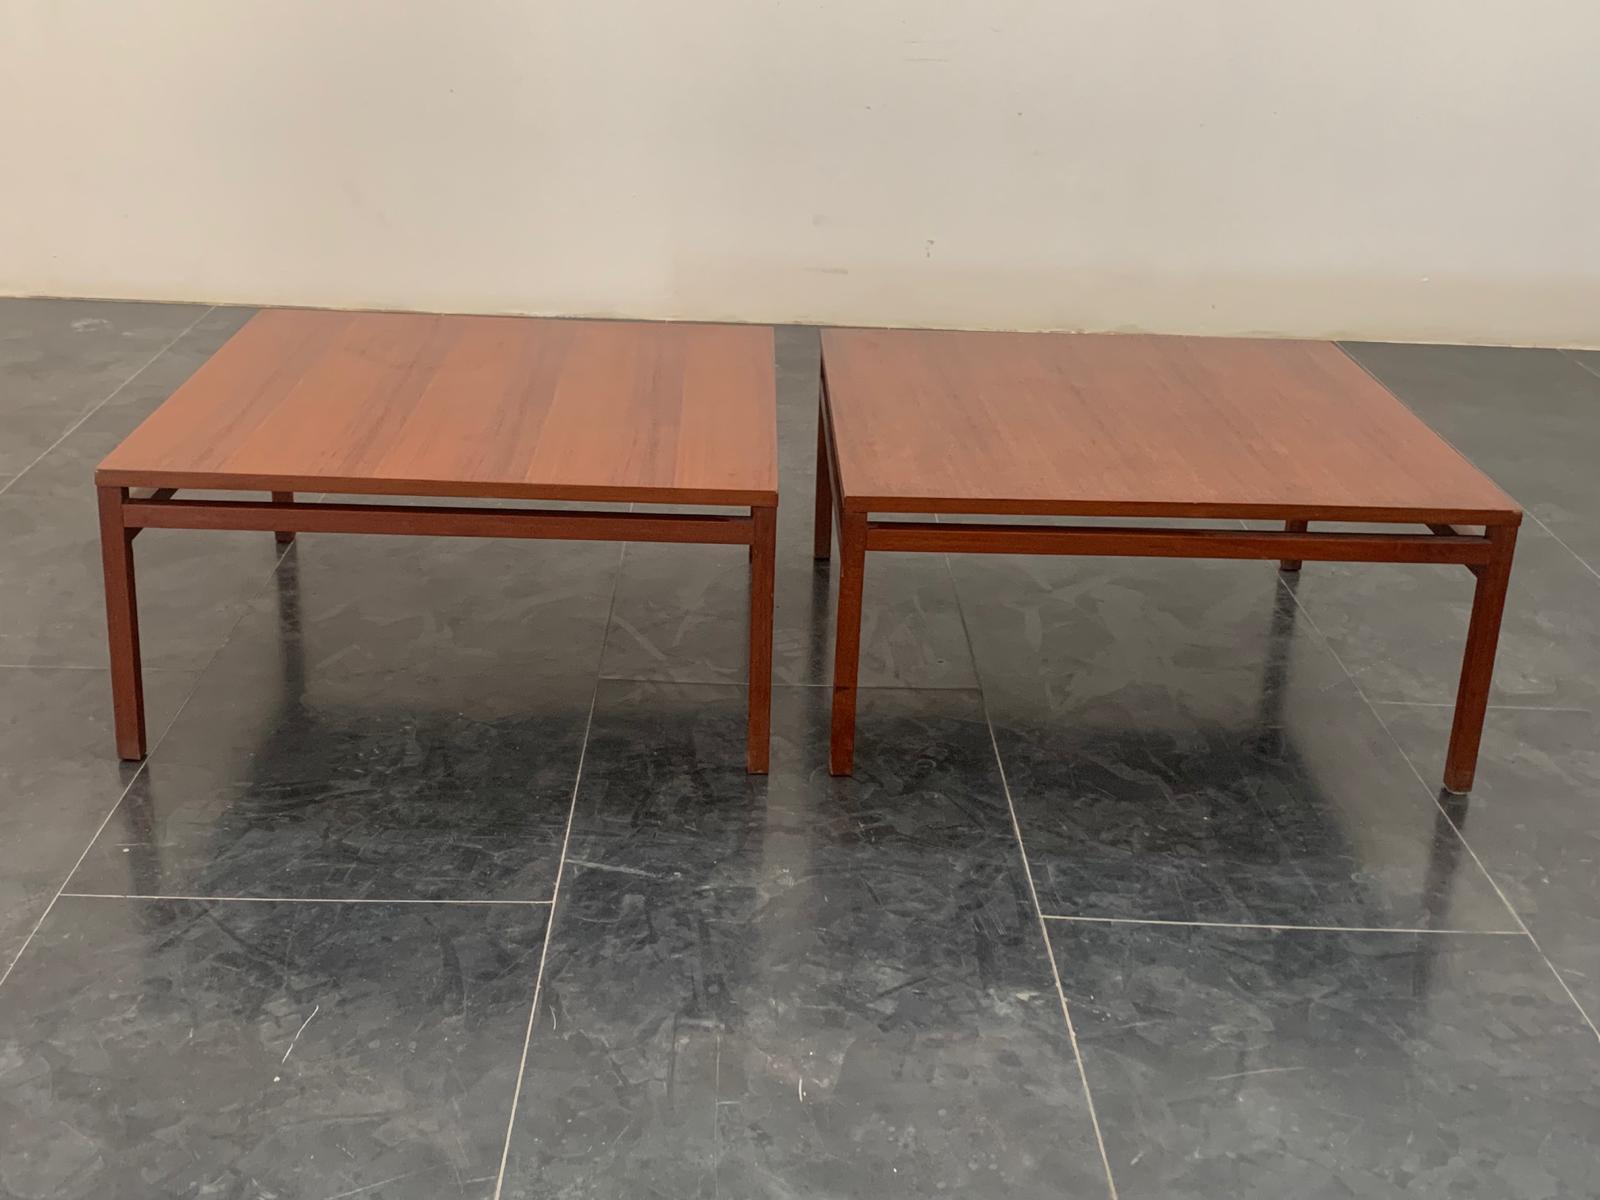 Pair of squared teak coffee table. Measures H35.5x74x75 each. Patina due to age and use. A stain on the top which is not decisive for the beauty of the set.
Packaging with bubble wrap and cardboard boxes is included. If the wooden packaging is